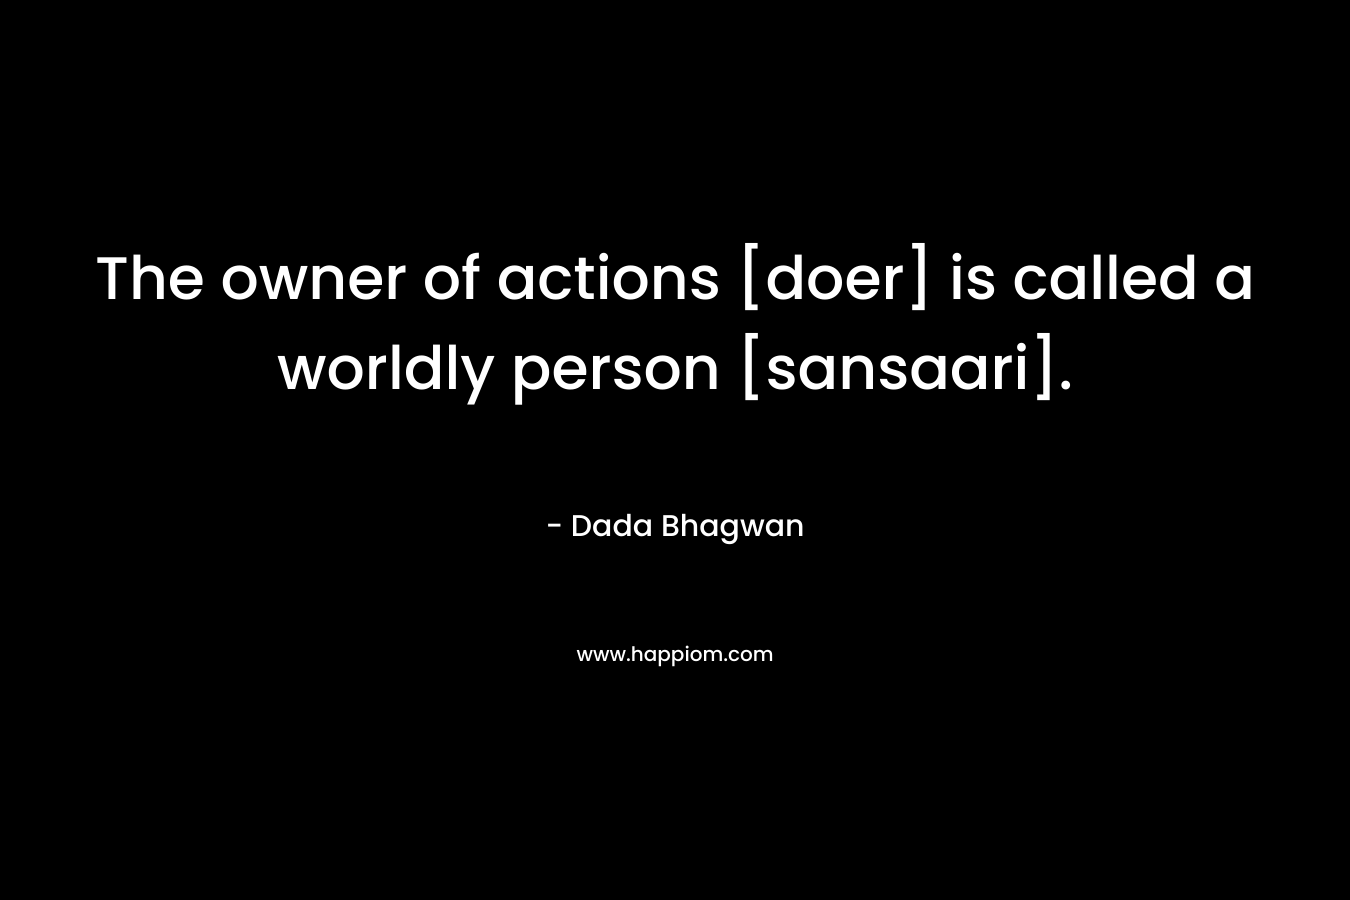 The owner of actions [doer] is called a worldly person [sansaari]. – Dada Bhagwan